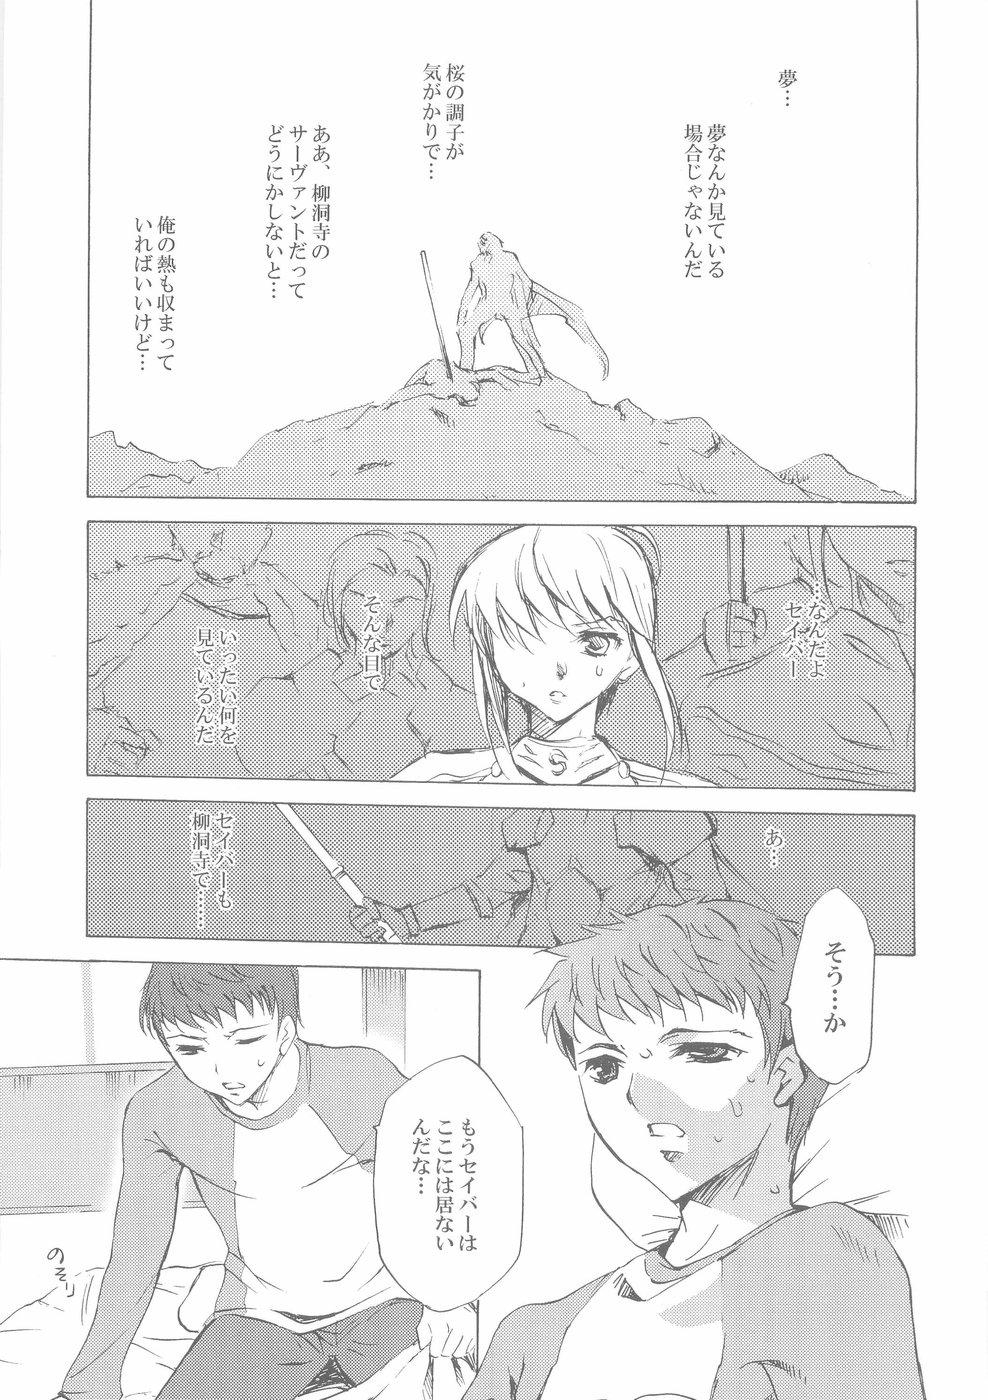 Mum Face II stay with my love - Fate stay night Dick Suck - Page 2